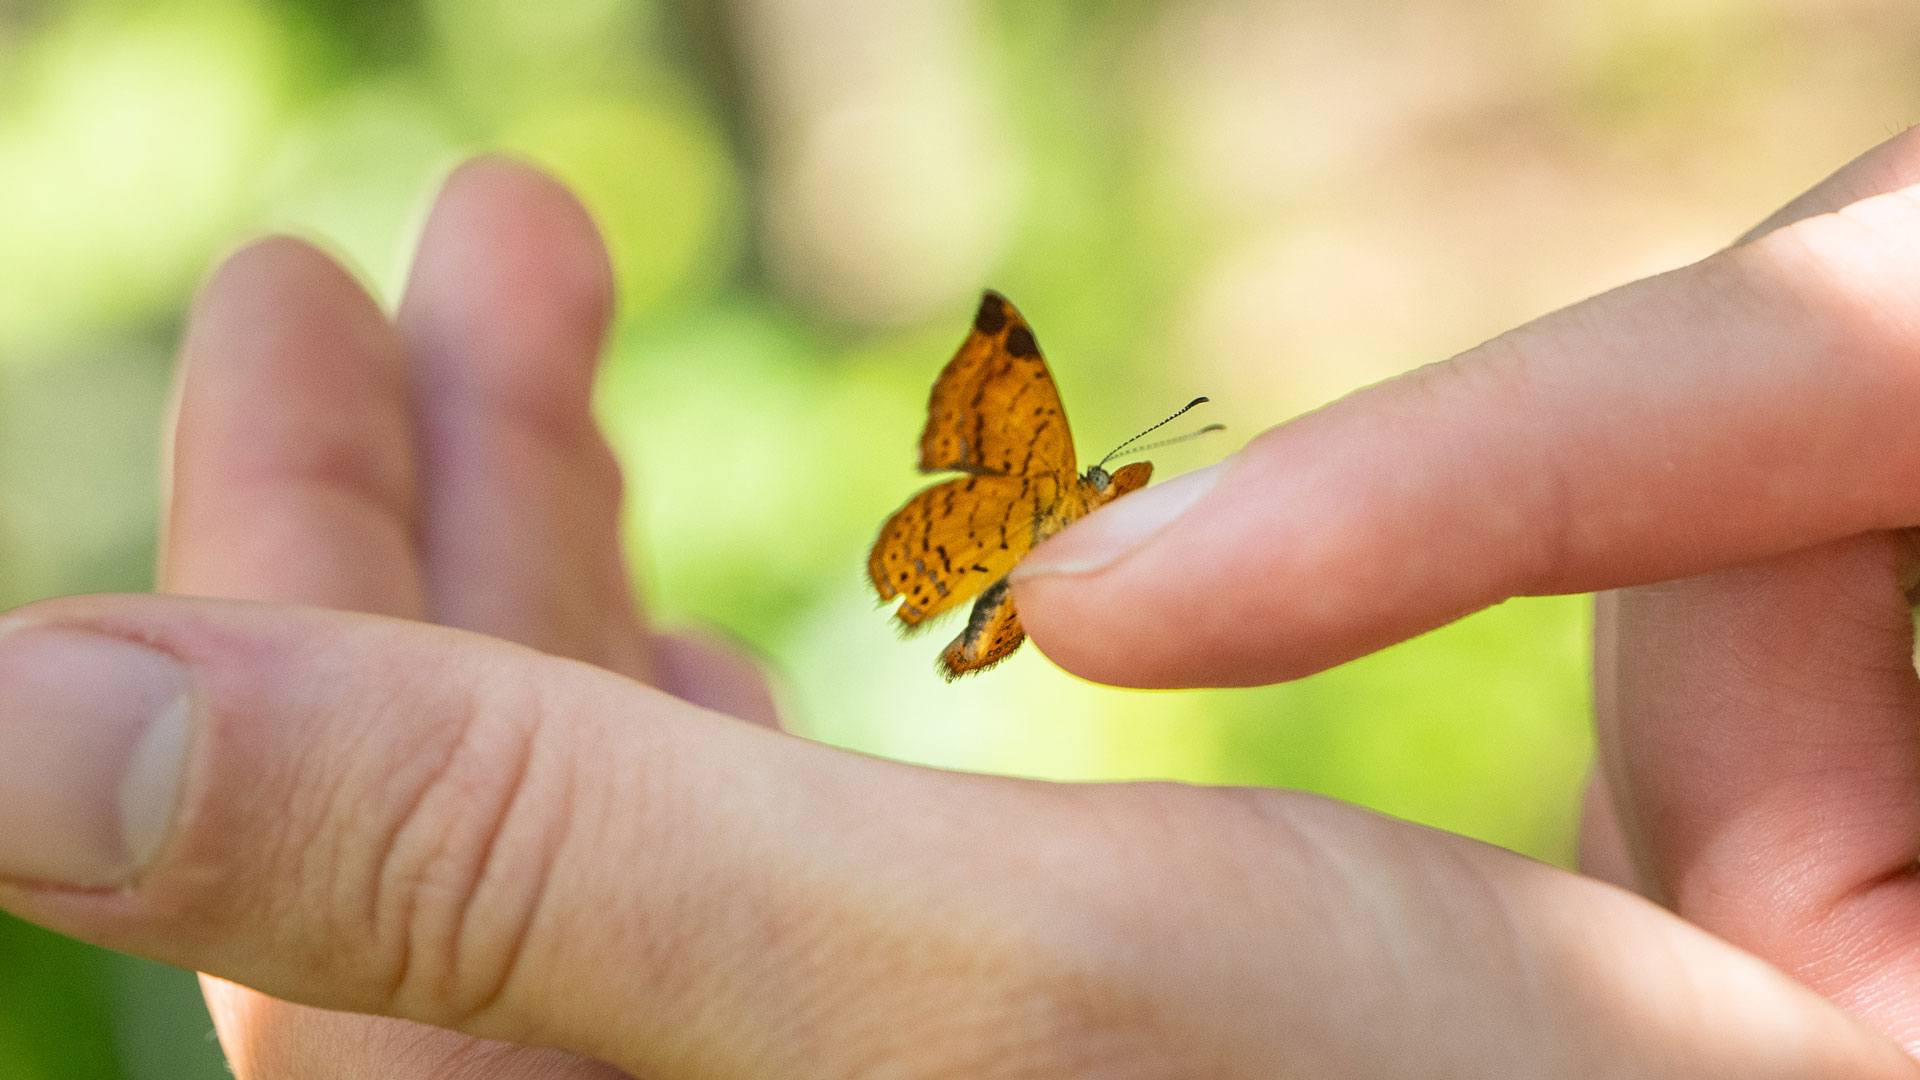 A metalmark butterfly rests on an ATC staff member's finger. Photo by Chris Gallaway/Horizonline Pictures